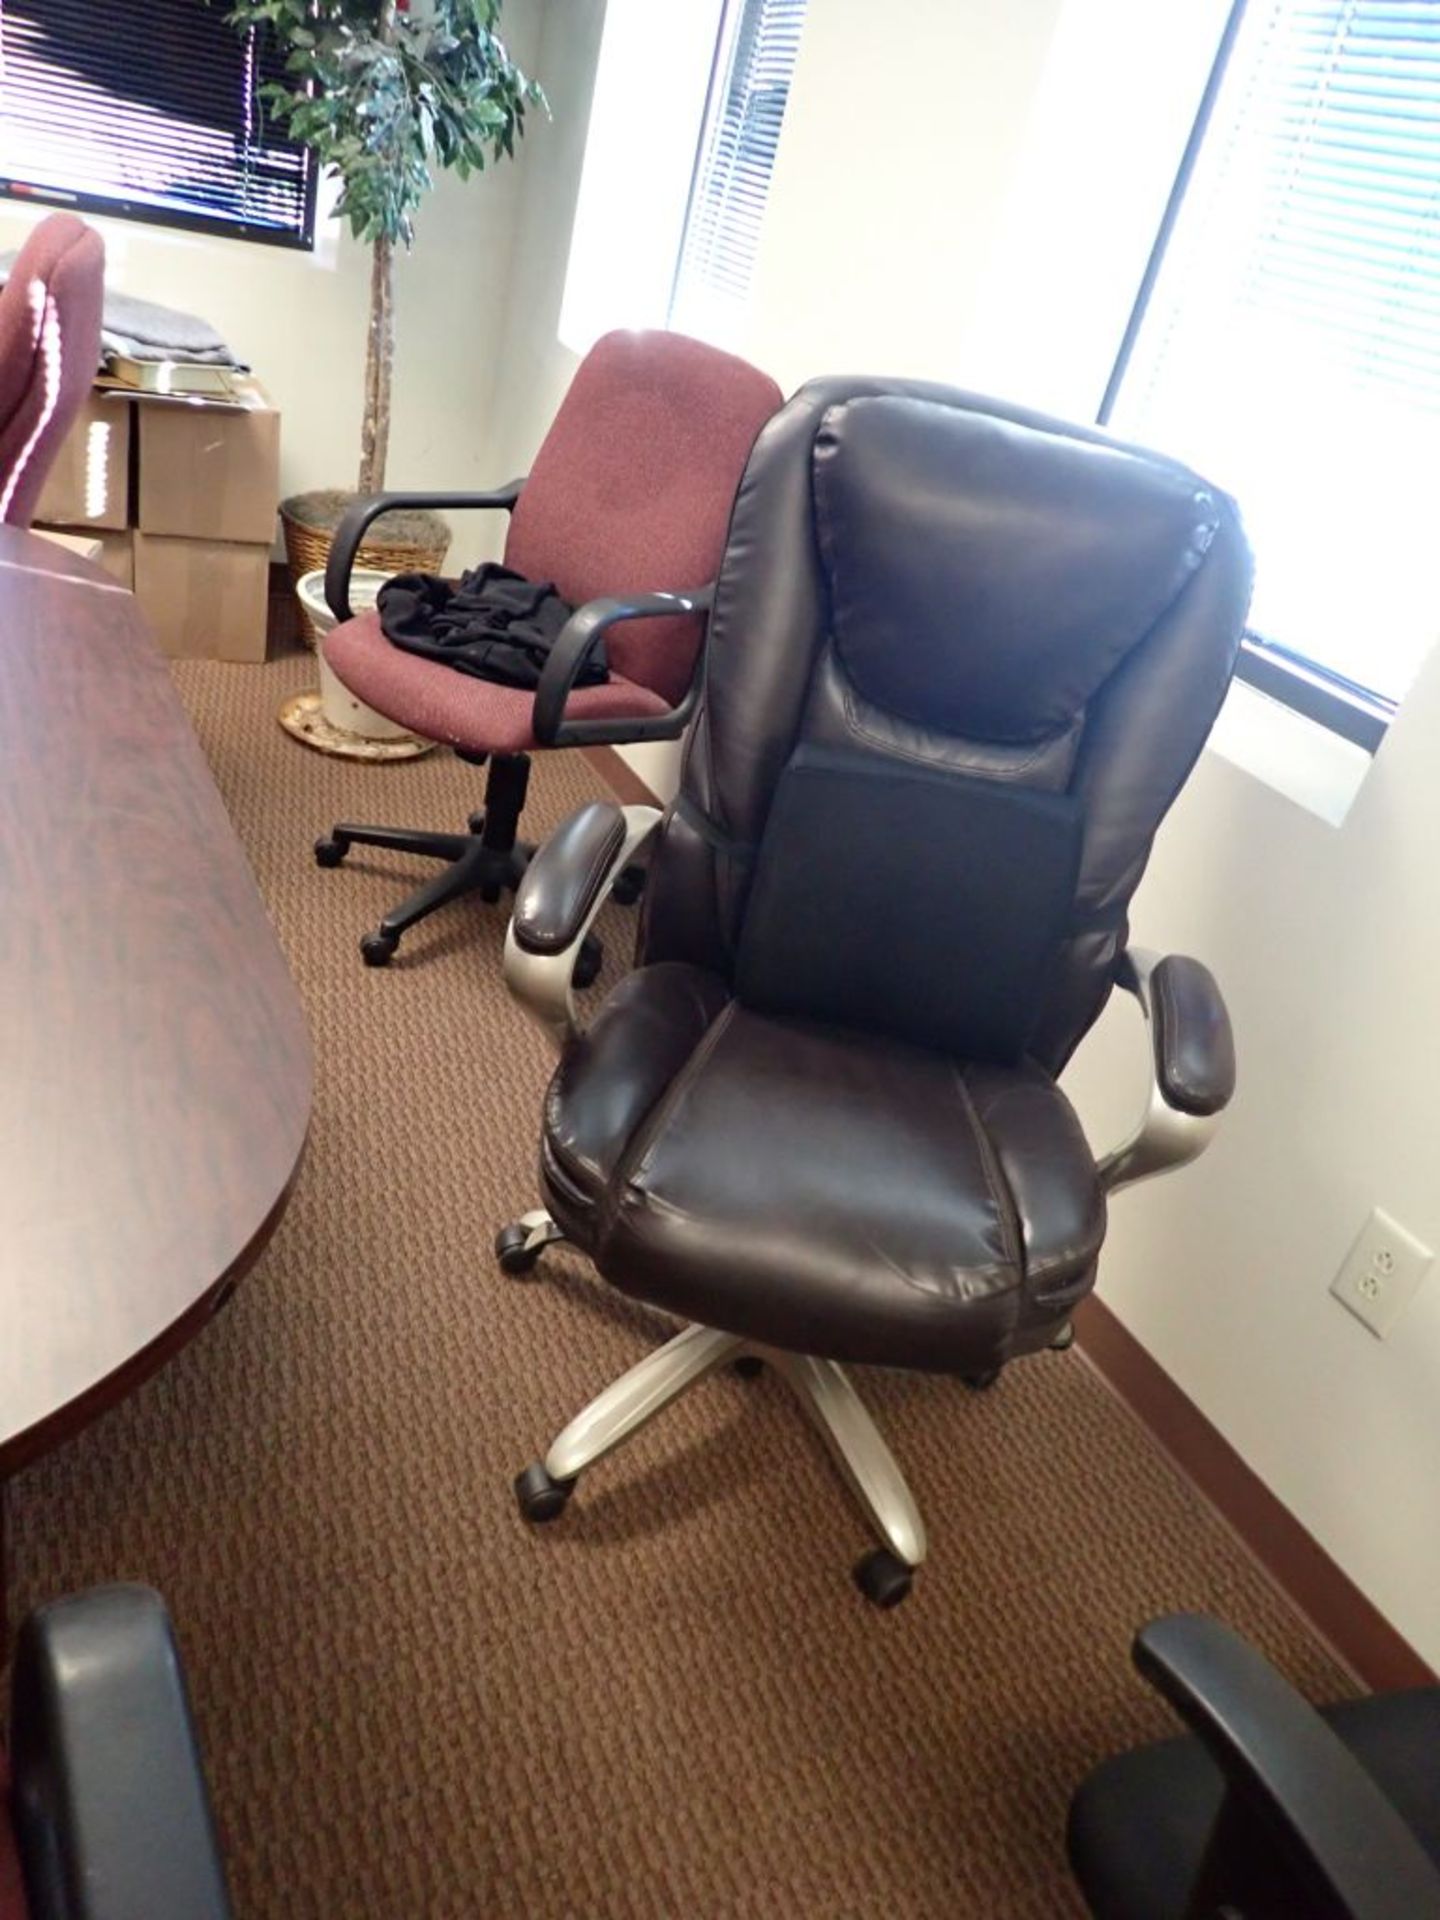 Lot of Conference Room Contents - Image 3 of 6